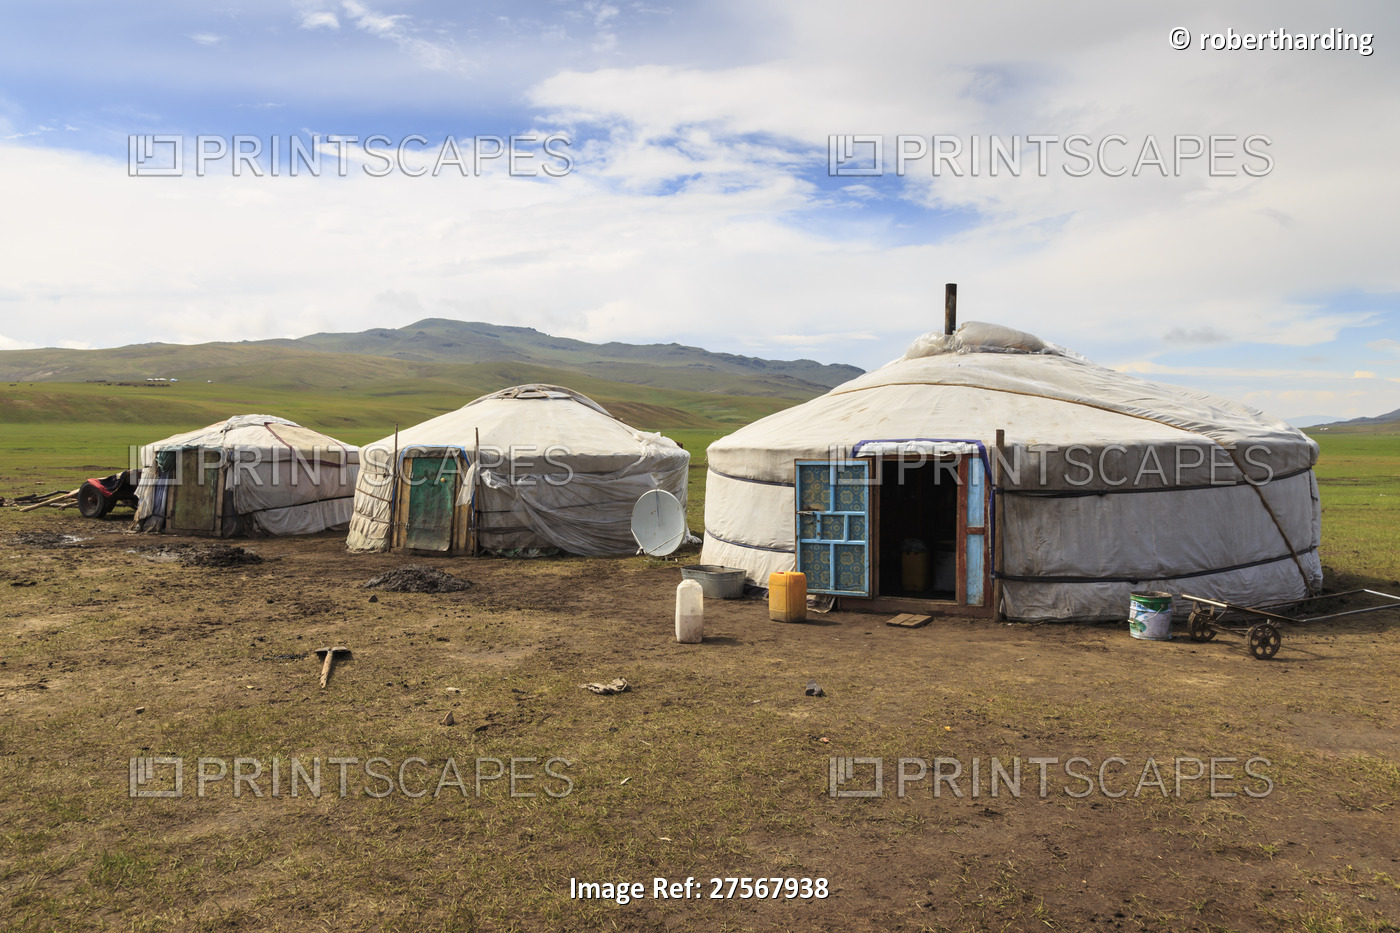 Line of family gers at a Summer nomad camp, distant gers and mountains, ...